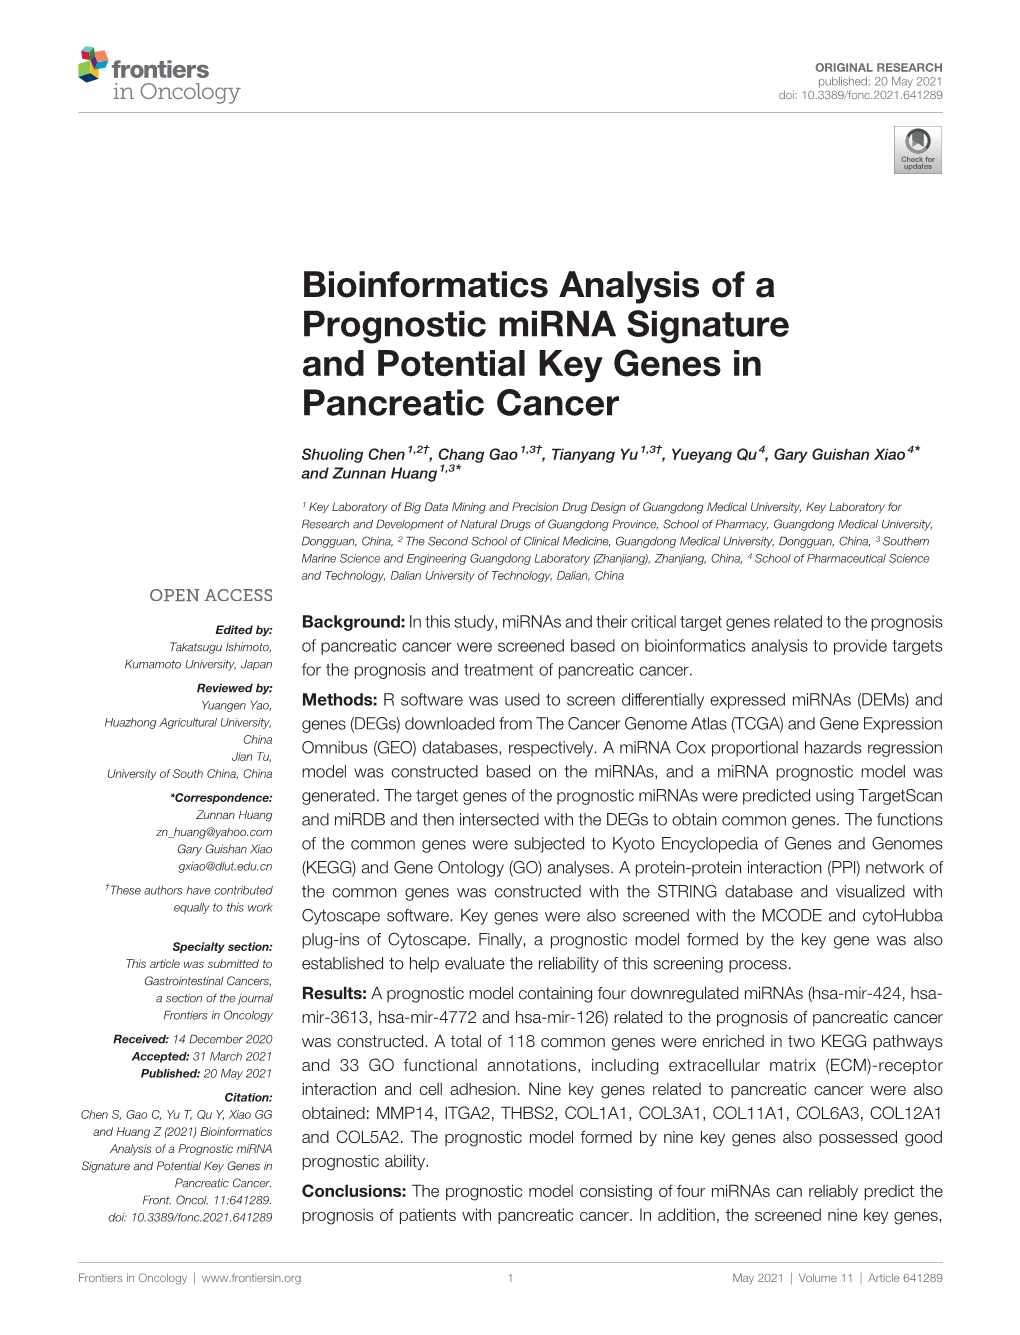 Bioinformatics Analysis of a Prognostic Mirna Signature and Potential Key Genes in Pancreatic Cancer